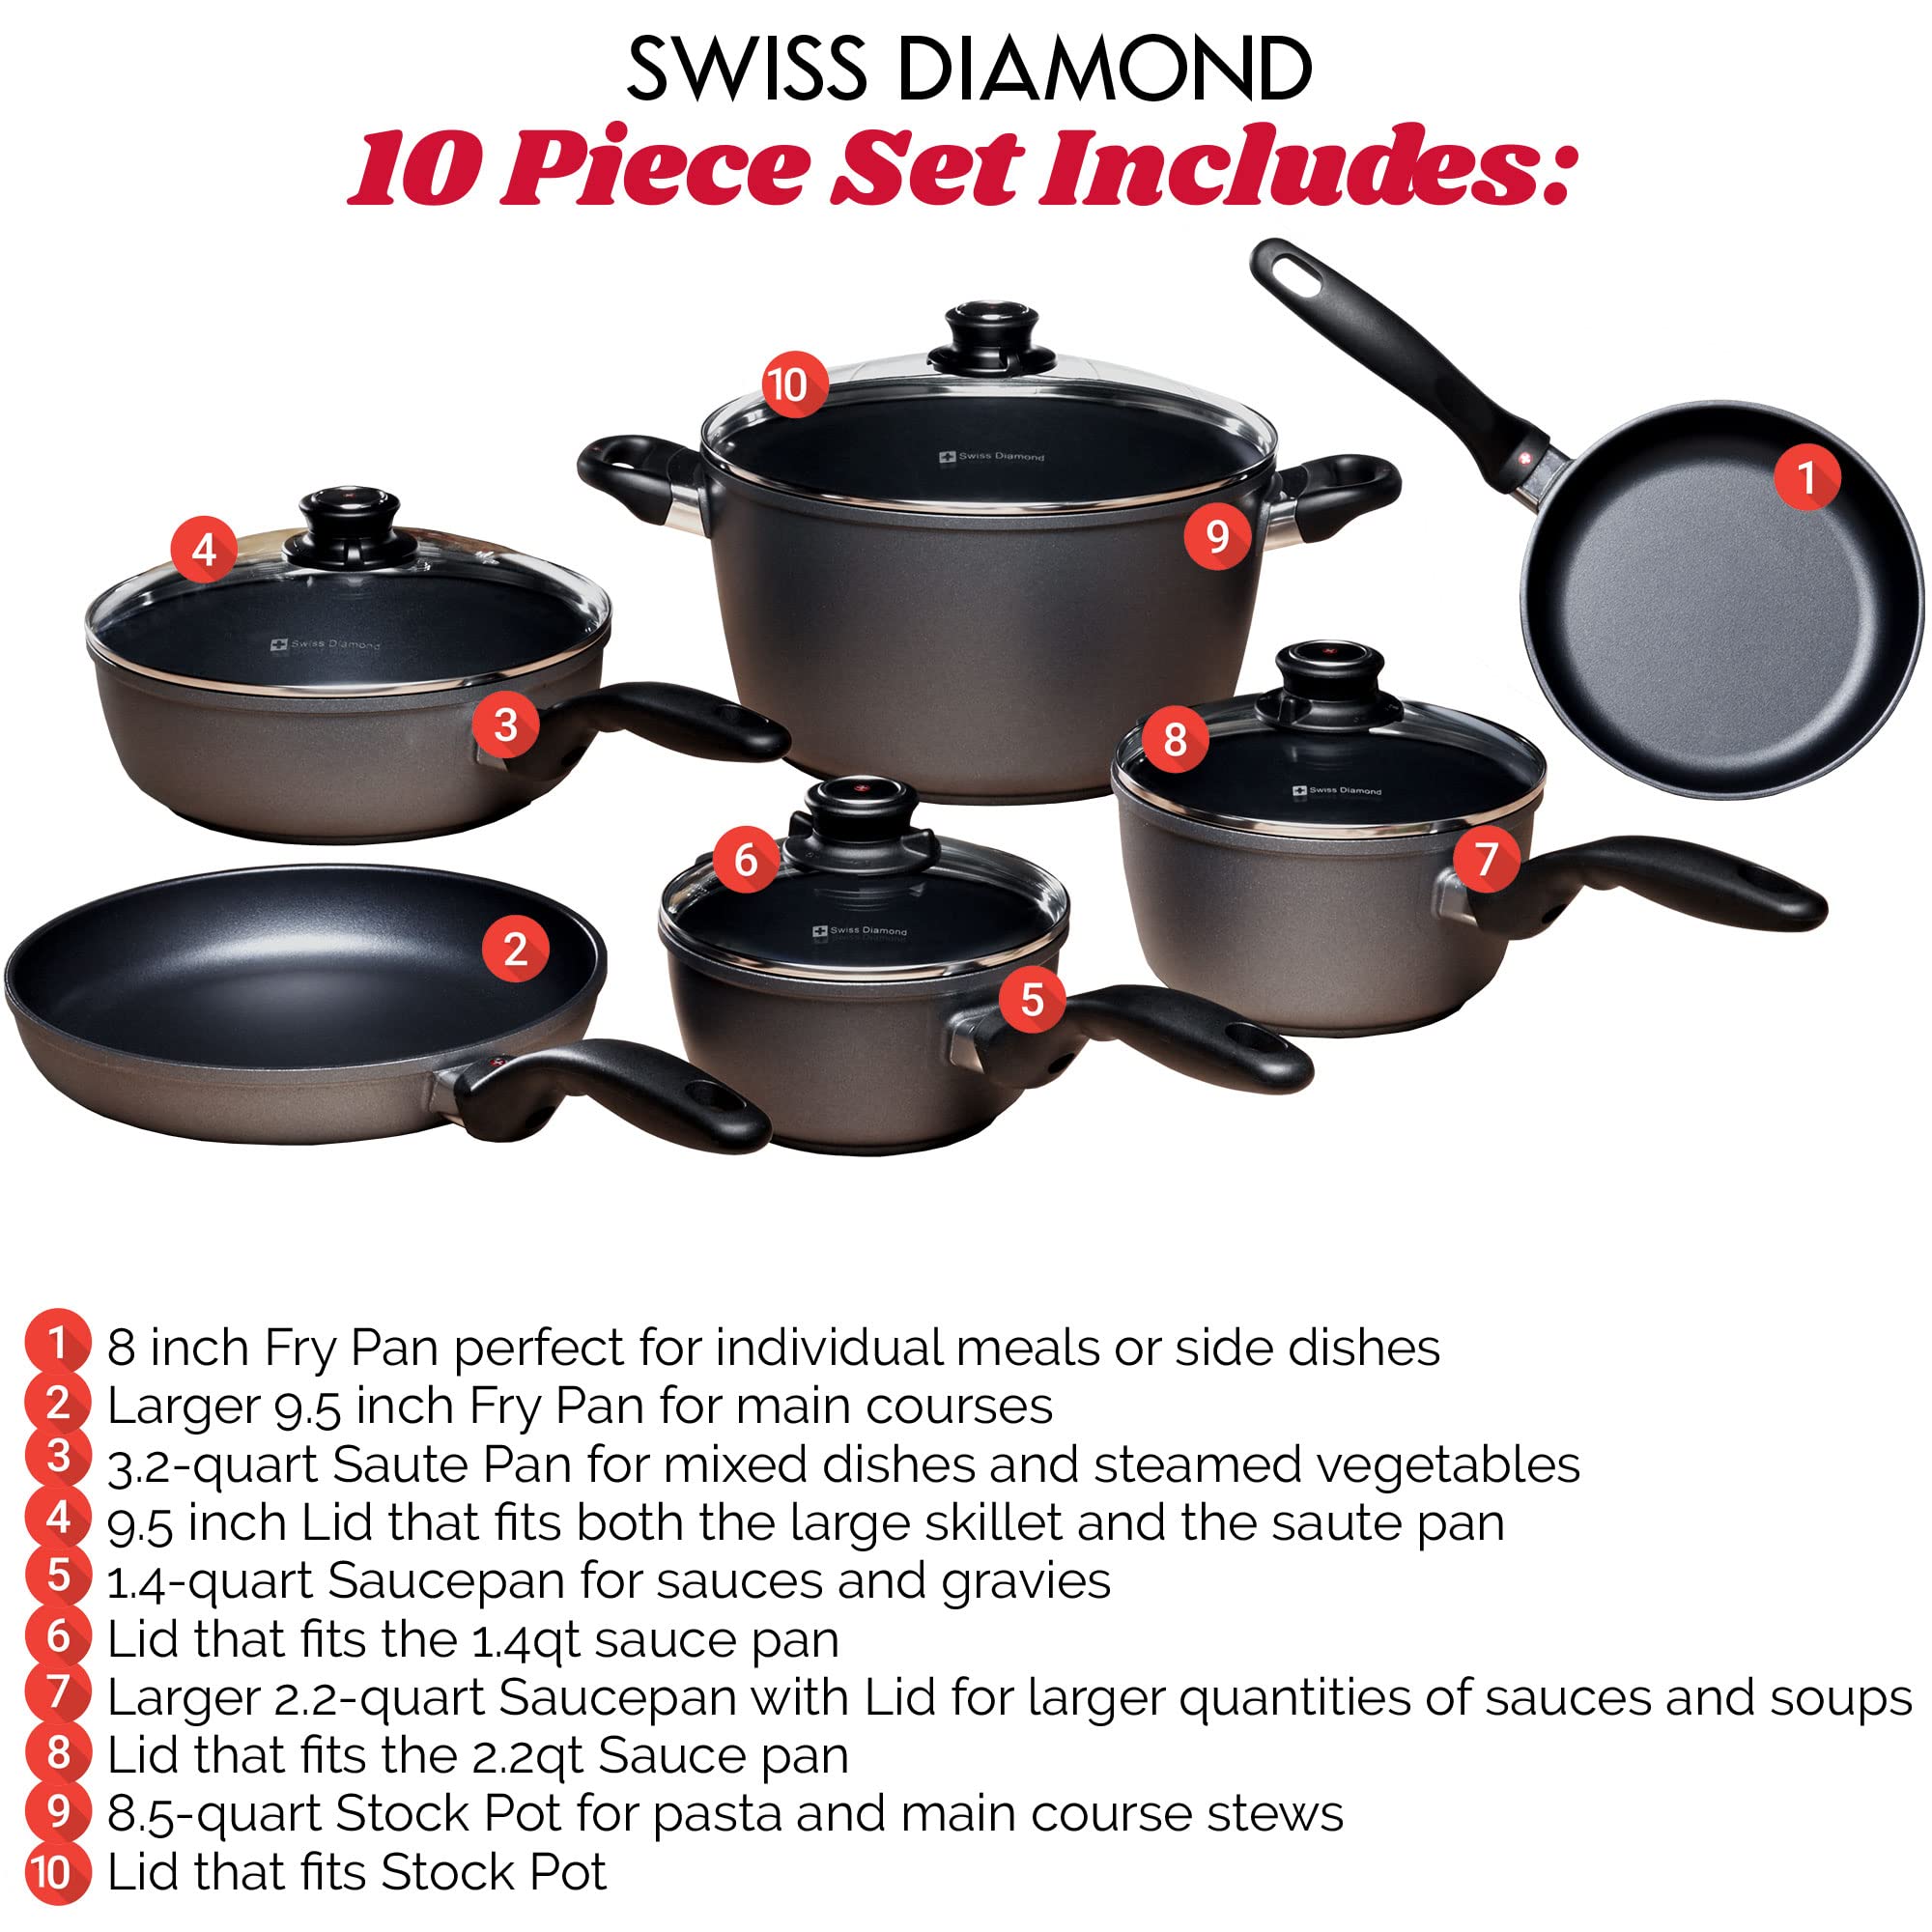 Swiss Diamond 10 Piece Kitchen Cookware Set - HD Nonstick Diamond Coated Aluminum Cooking Pots and Pans, Includes Lids, Dishwasher Safe and Oven Safe Fry Pan, Grey